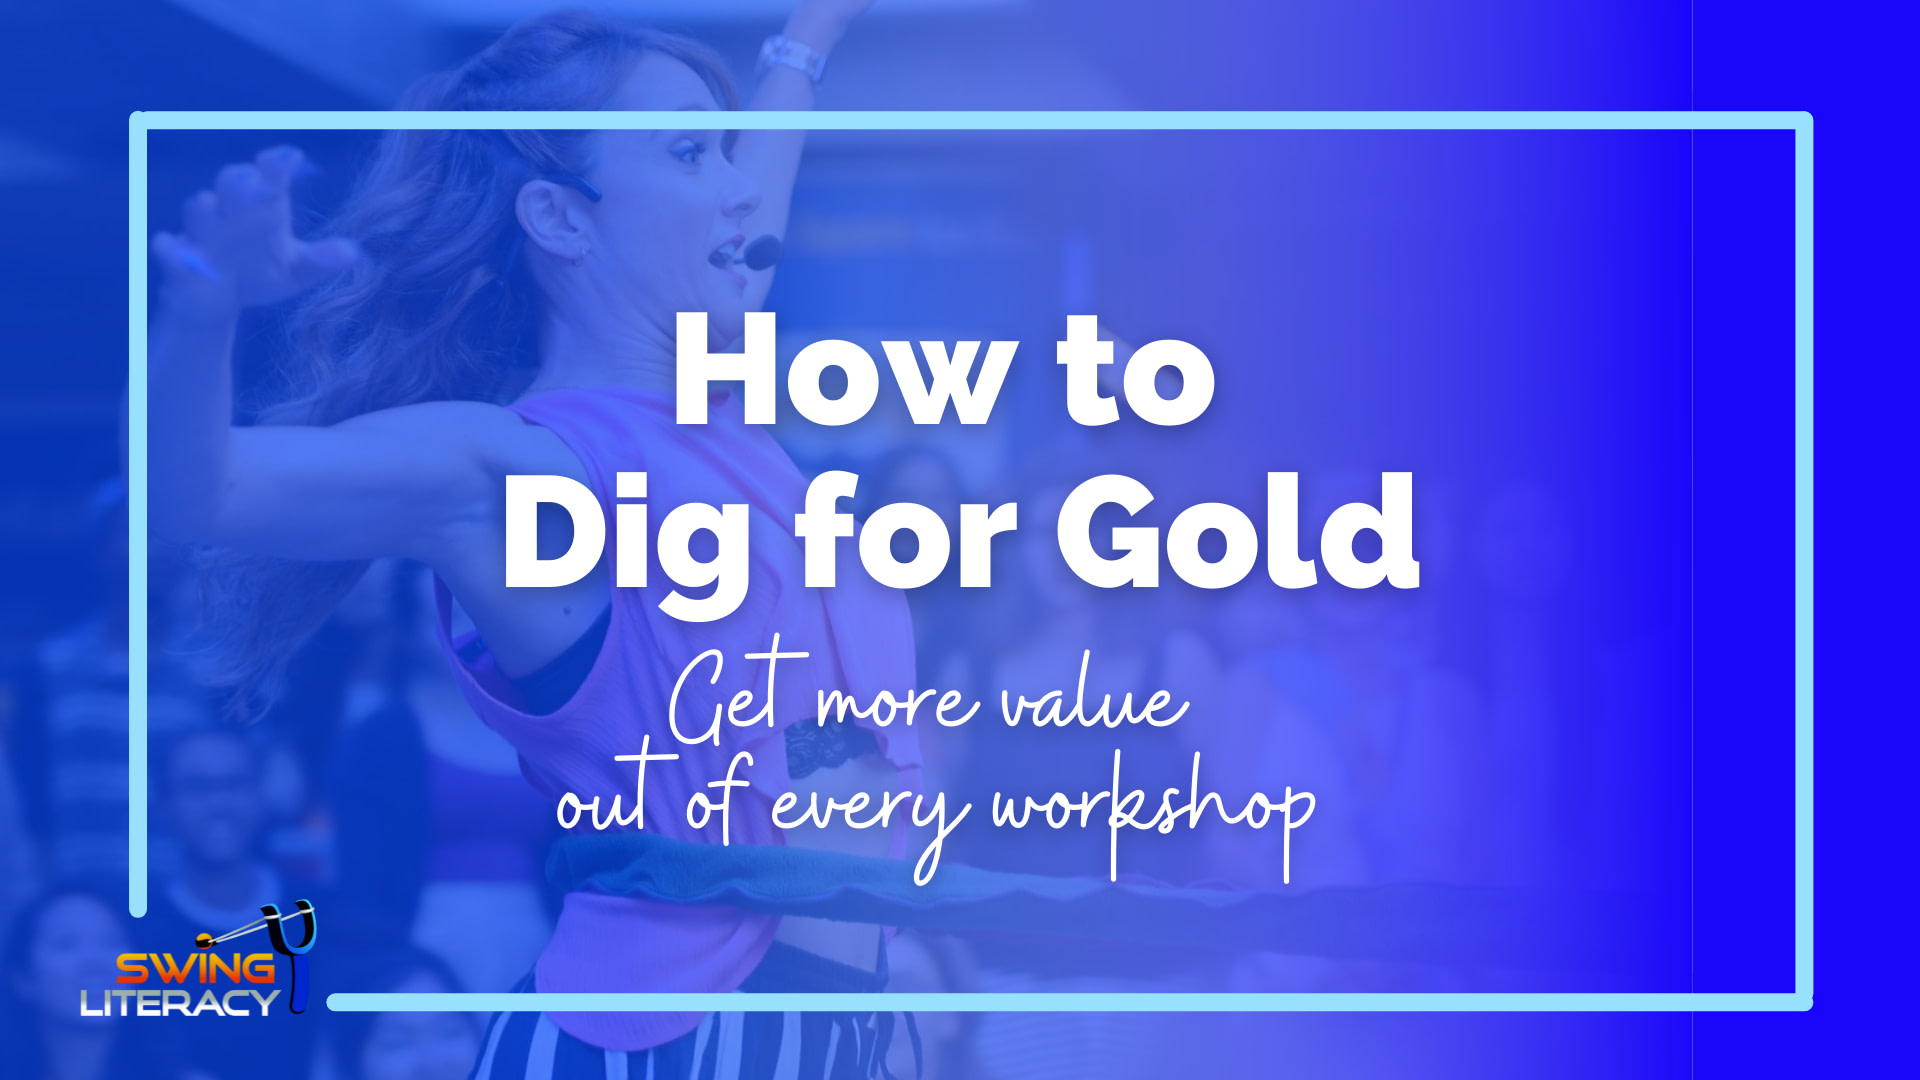 How to Dig for Gold: The Untapped Value of Workshops